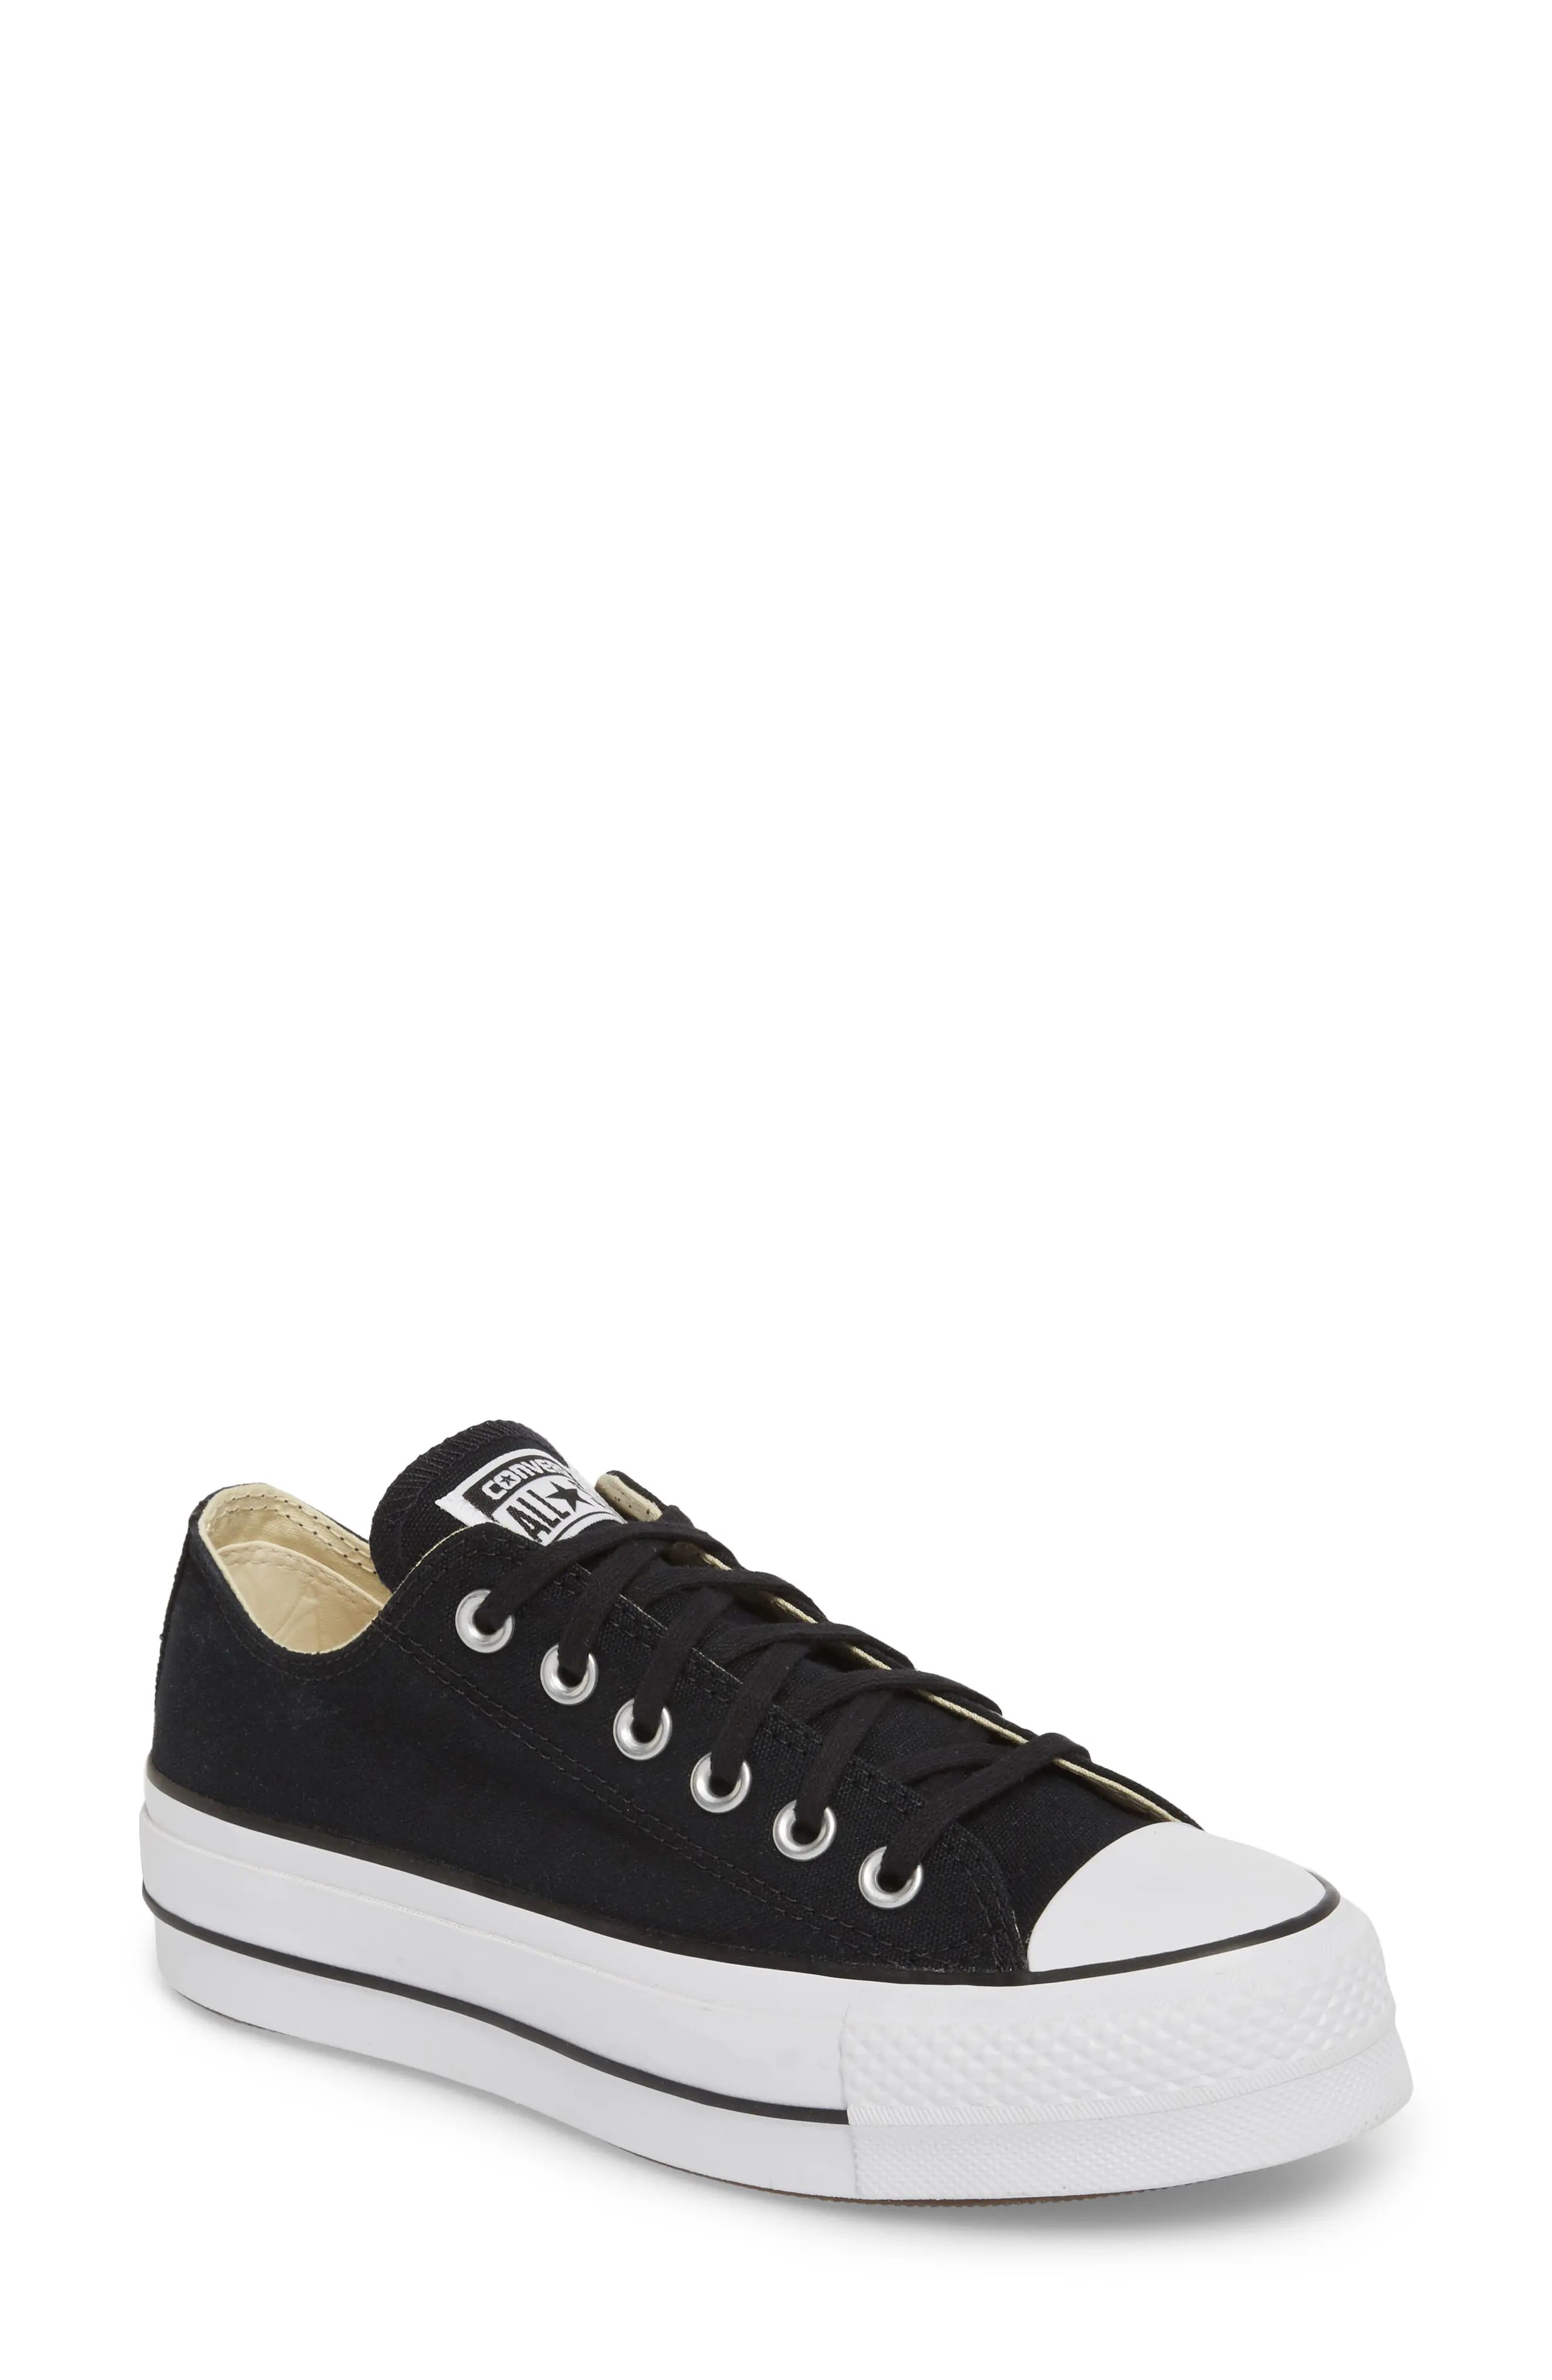 Converse Chuck Taylor(R) All Star(R) Platform Sneaker, Size 10 in Black/White/White/White at Nordstr | Nordstrom